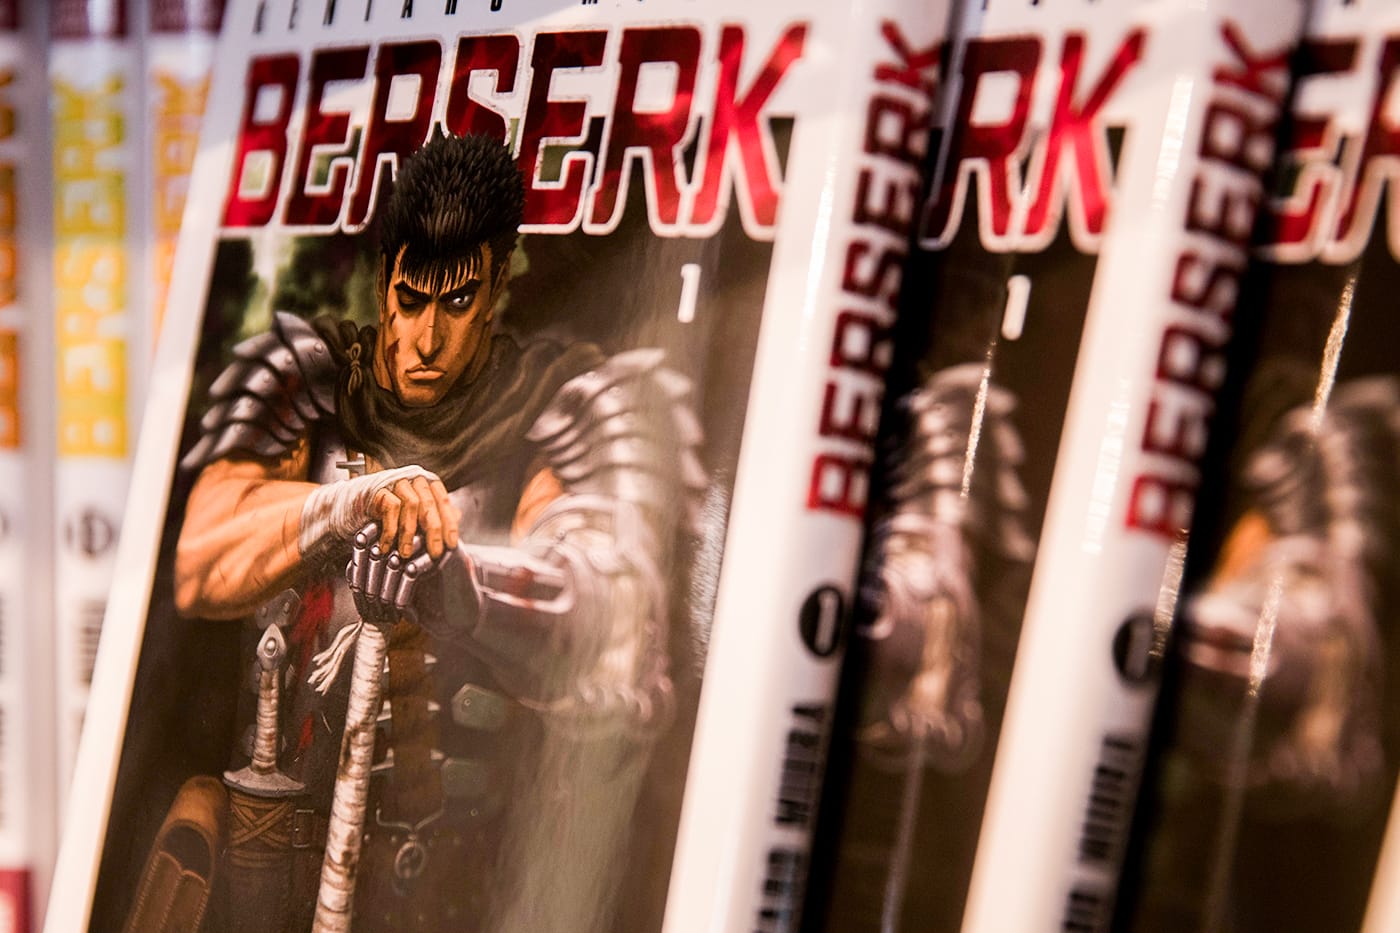 Berserk Vol.41 Special Edition with Canvas Art and Drama CD Japanese from Japan